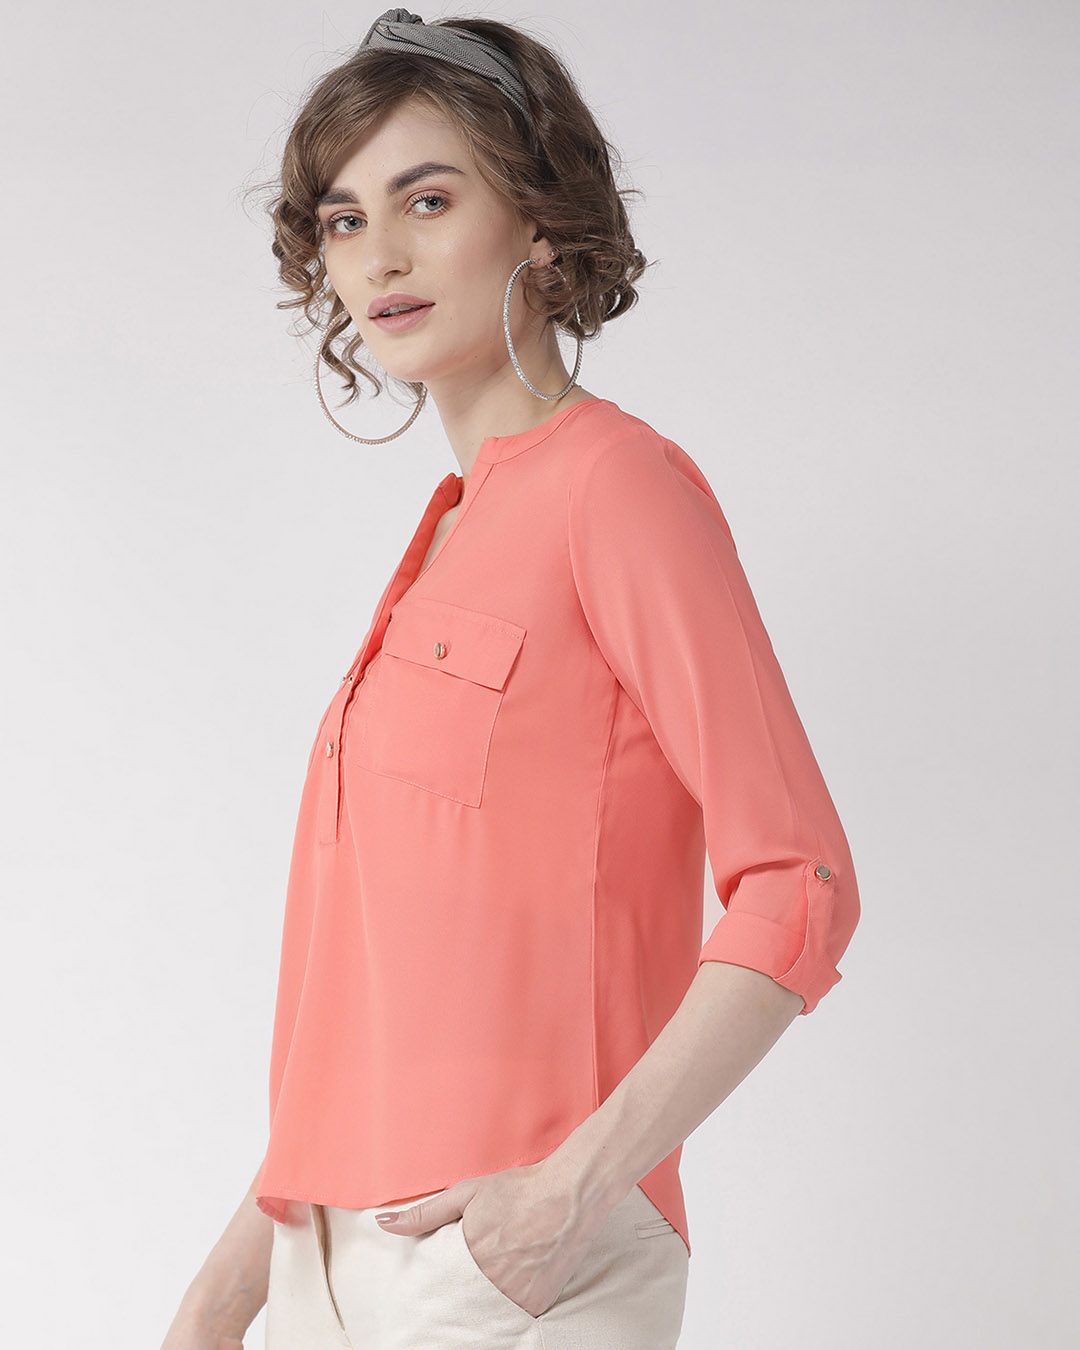 Shop Women's Pink Solid Shirt Style Top-Back